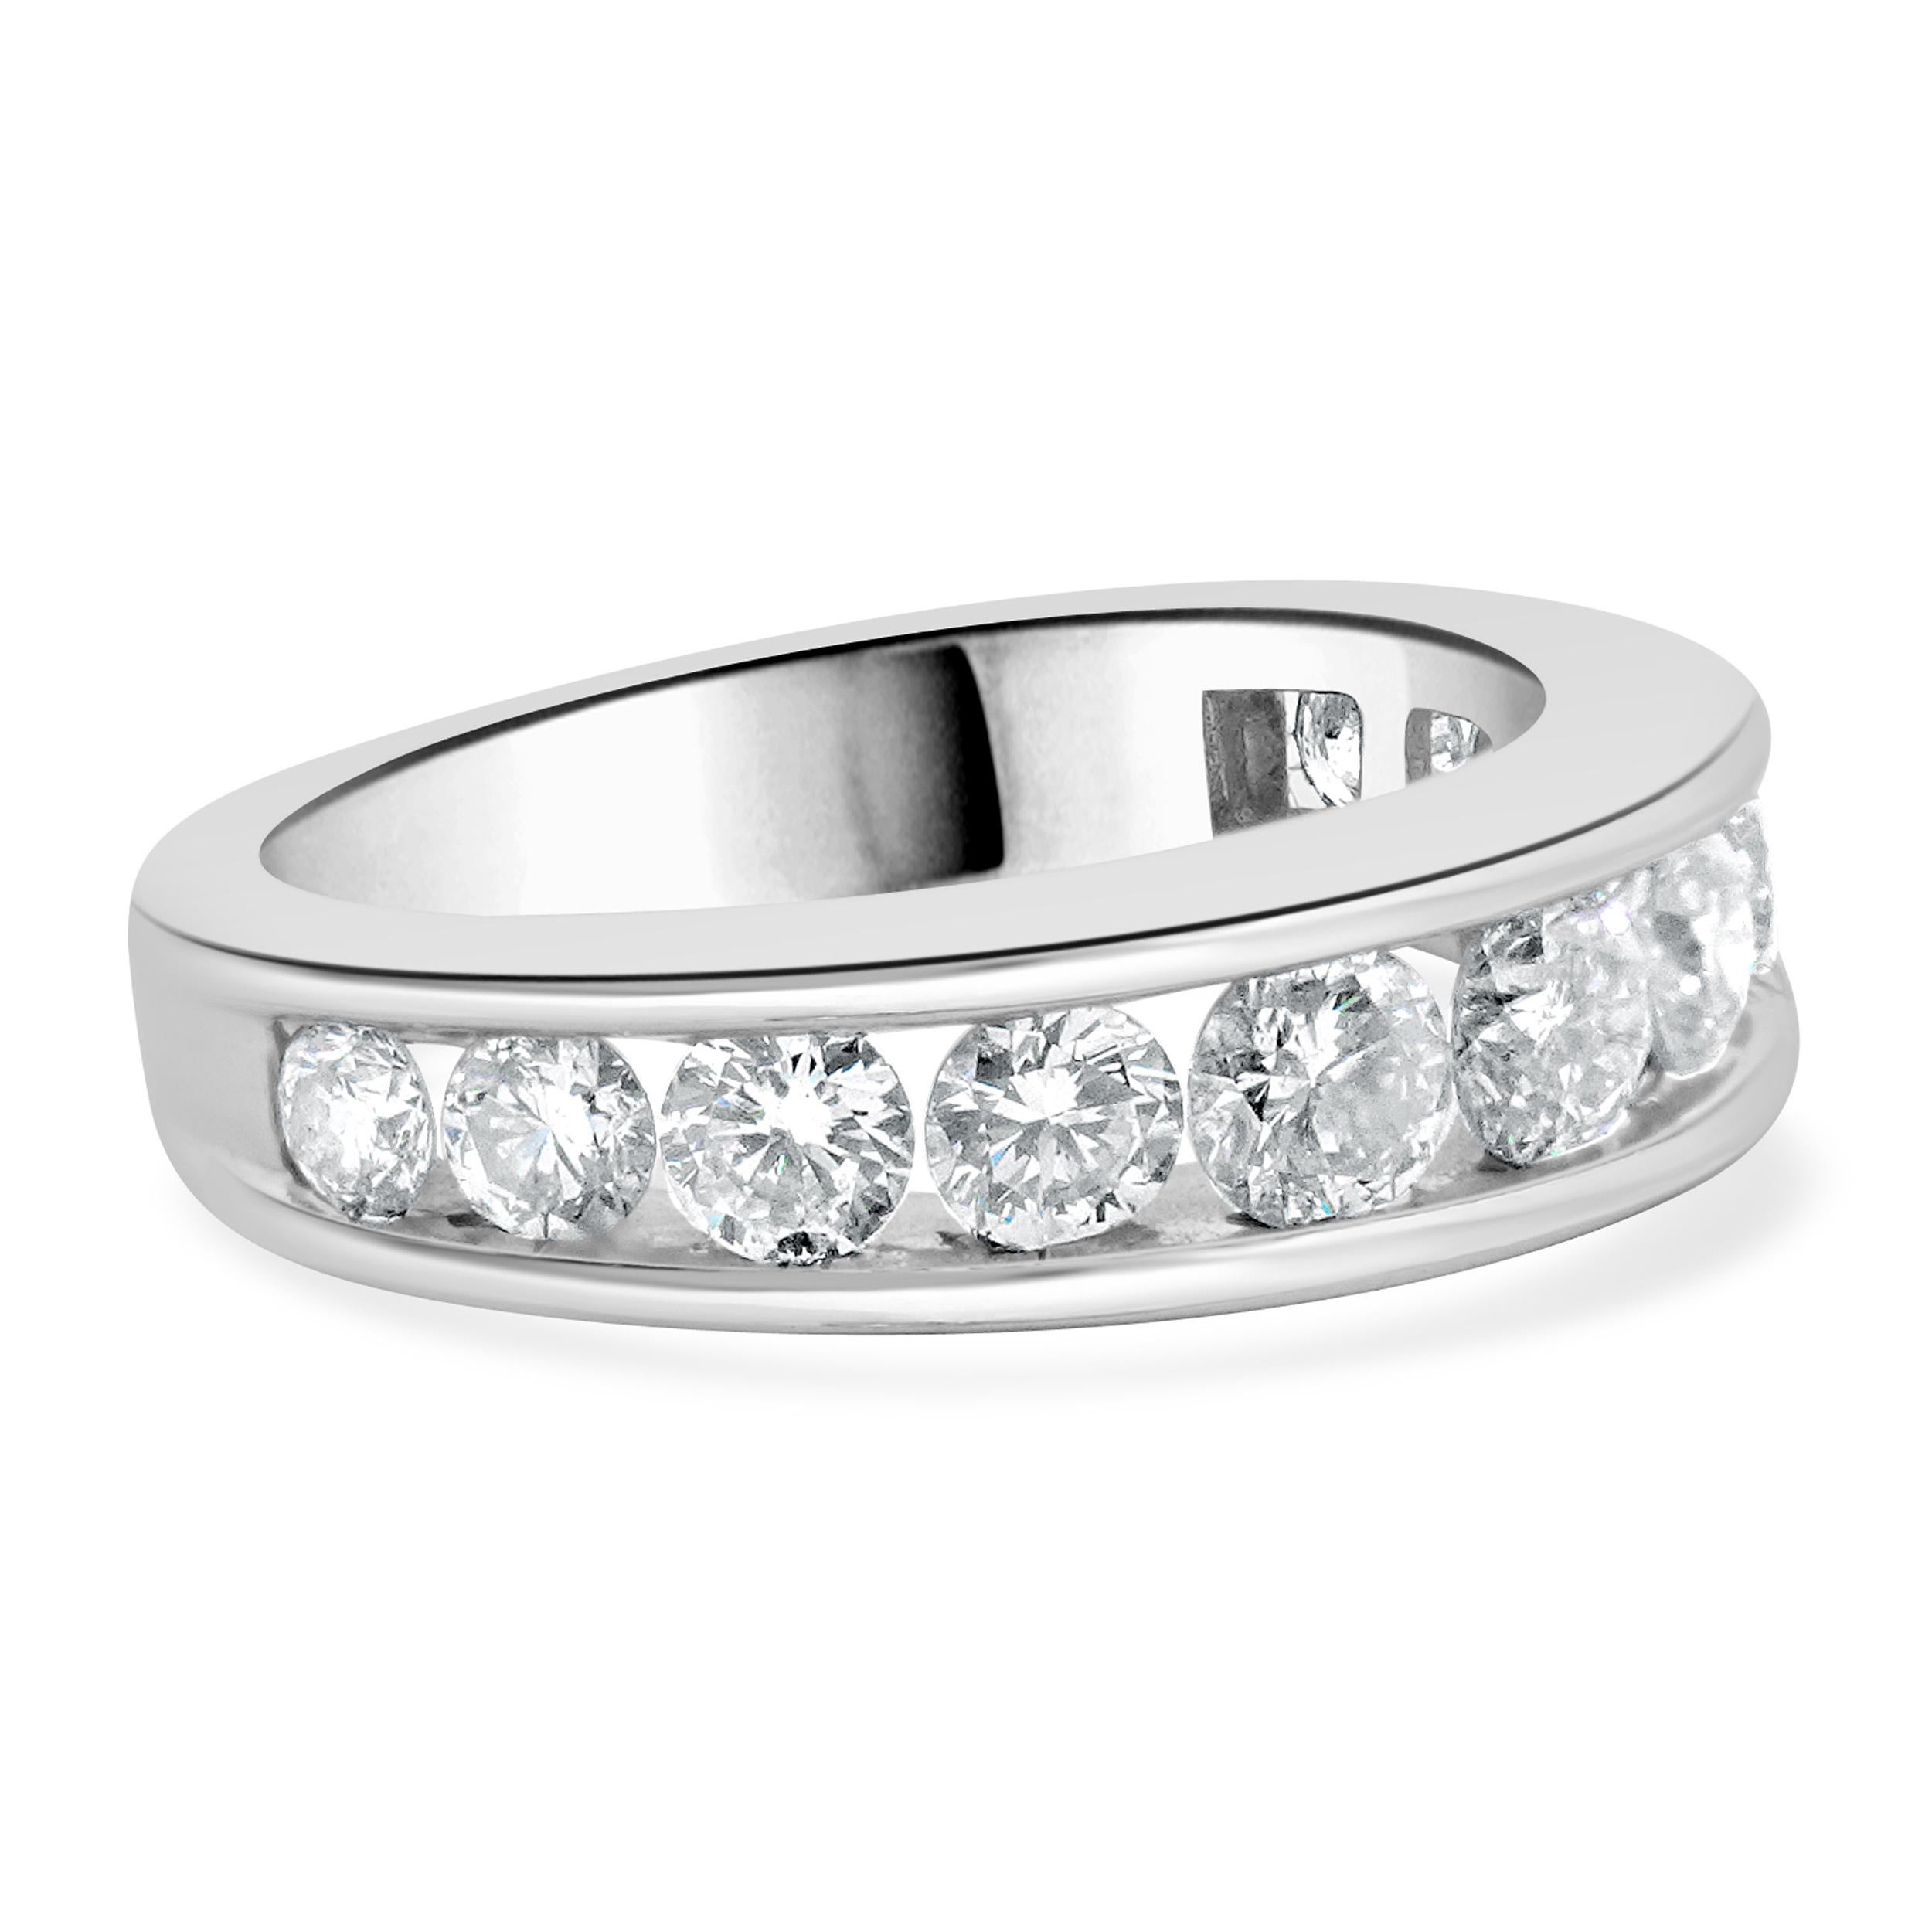 Designer: Custom
Material: 14K white gold
Diamonds: 11 round brilliant cut = 1.00cttw
Color: H
Clarity: SI2-I1
Size: 4.25 sizing available 
Dimensions: ring top measures 5.4mm in width
Weight: 4.63 grams
